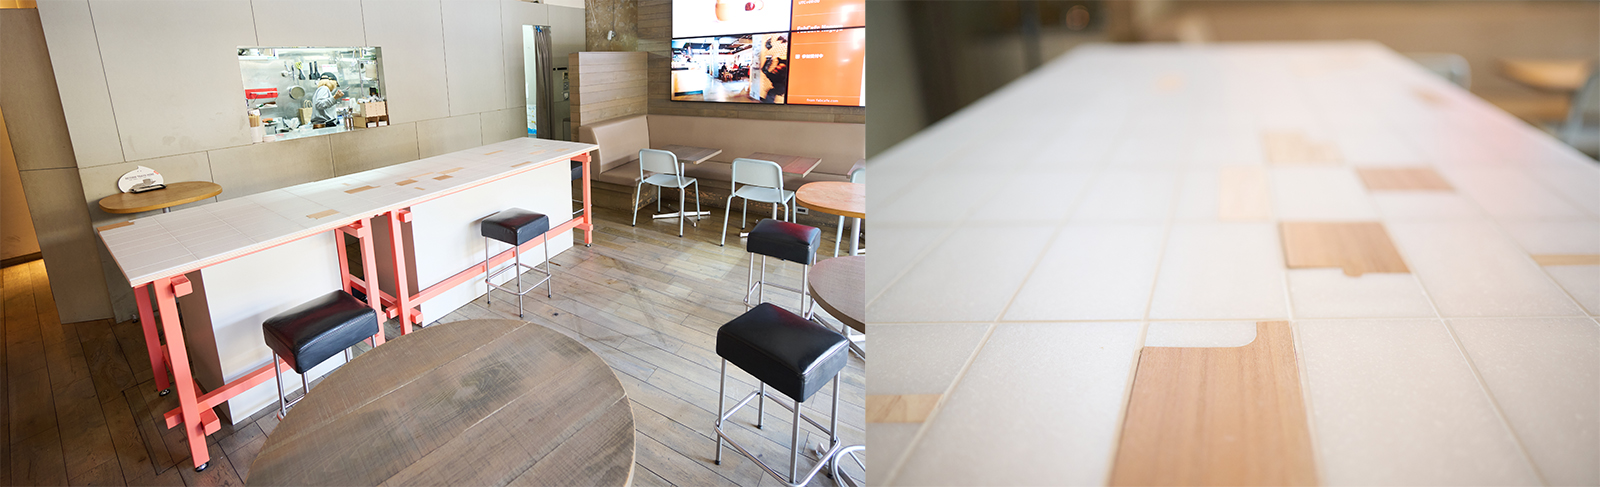 Photo: Counter table installed at FabCafe Tokyo. The tabletop is made of a combination of white artificial marble and wood.